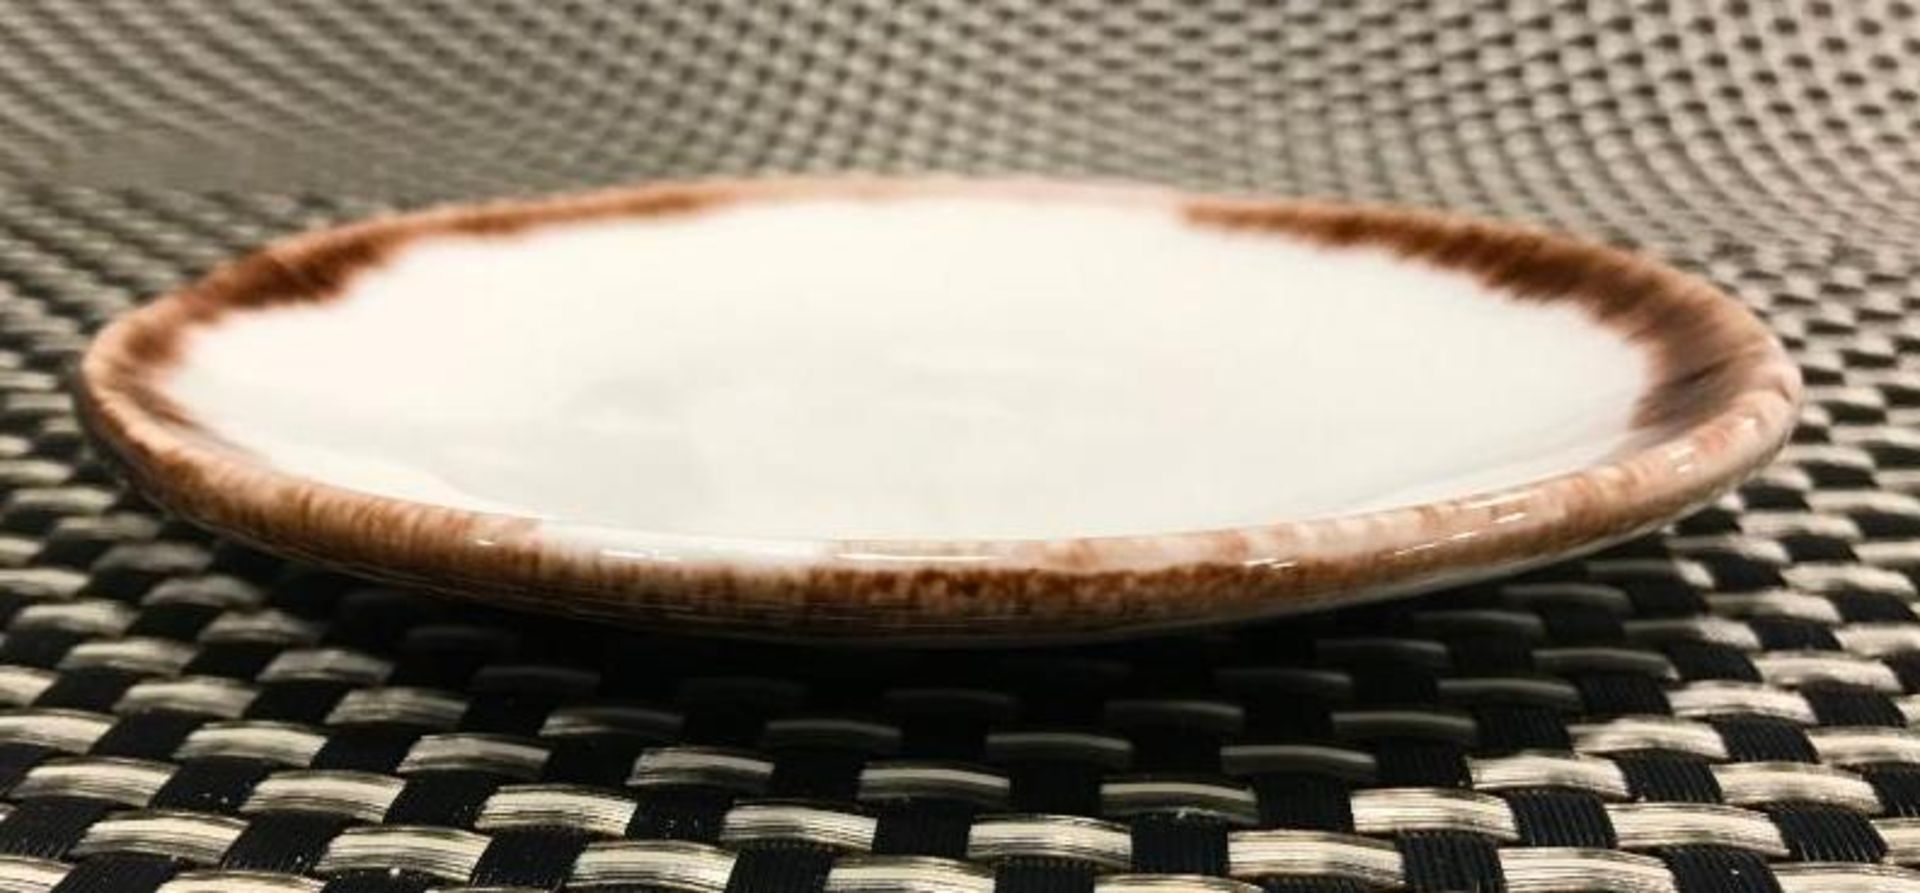 DUDSON HARVEST NATURAL PLATE 5.5" -12/CASE, MADE IN ENGLAND - Image 3 of 5